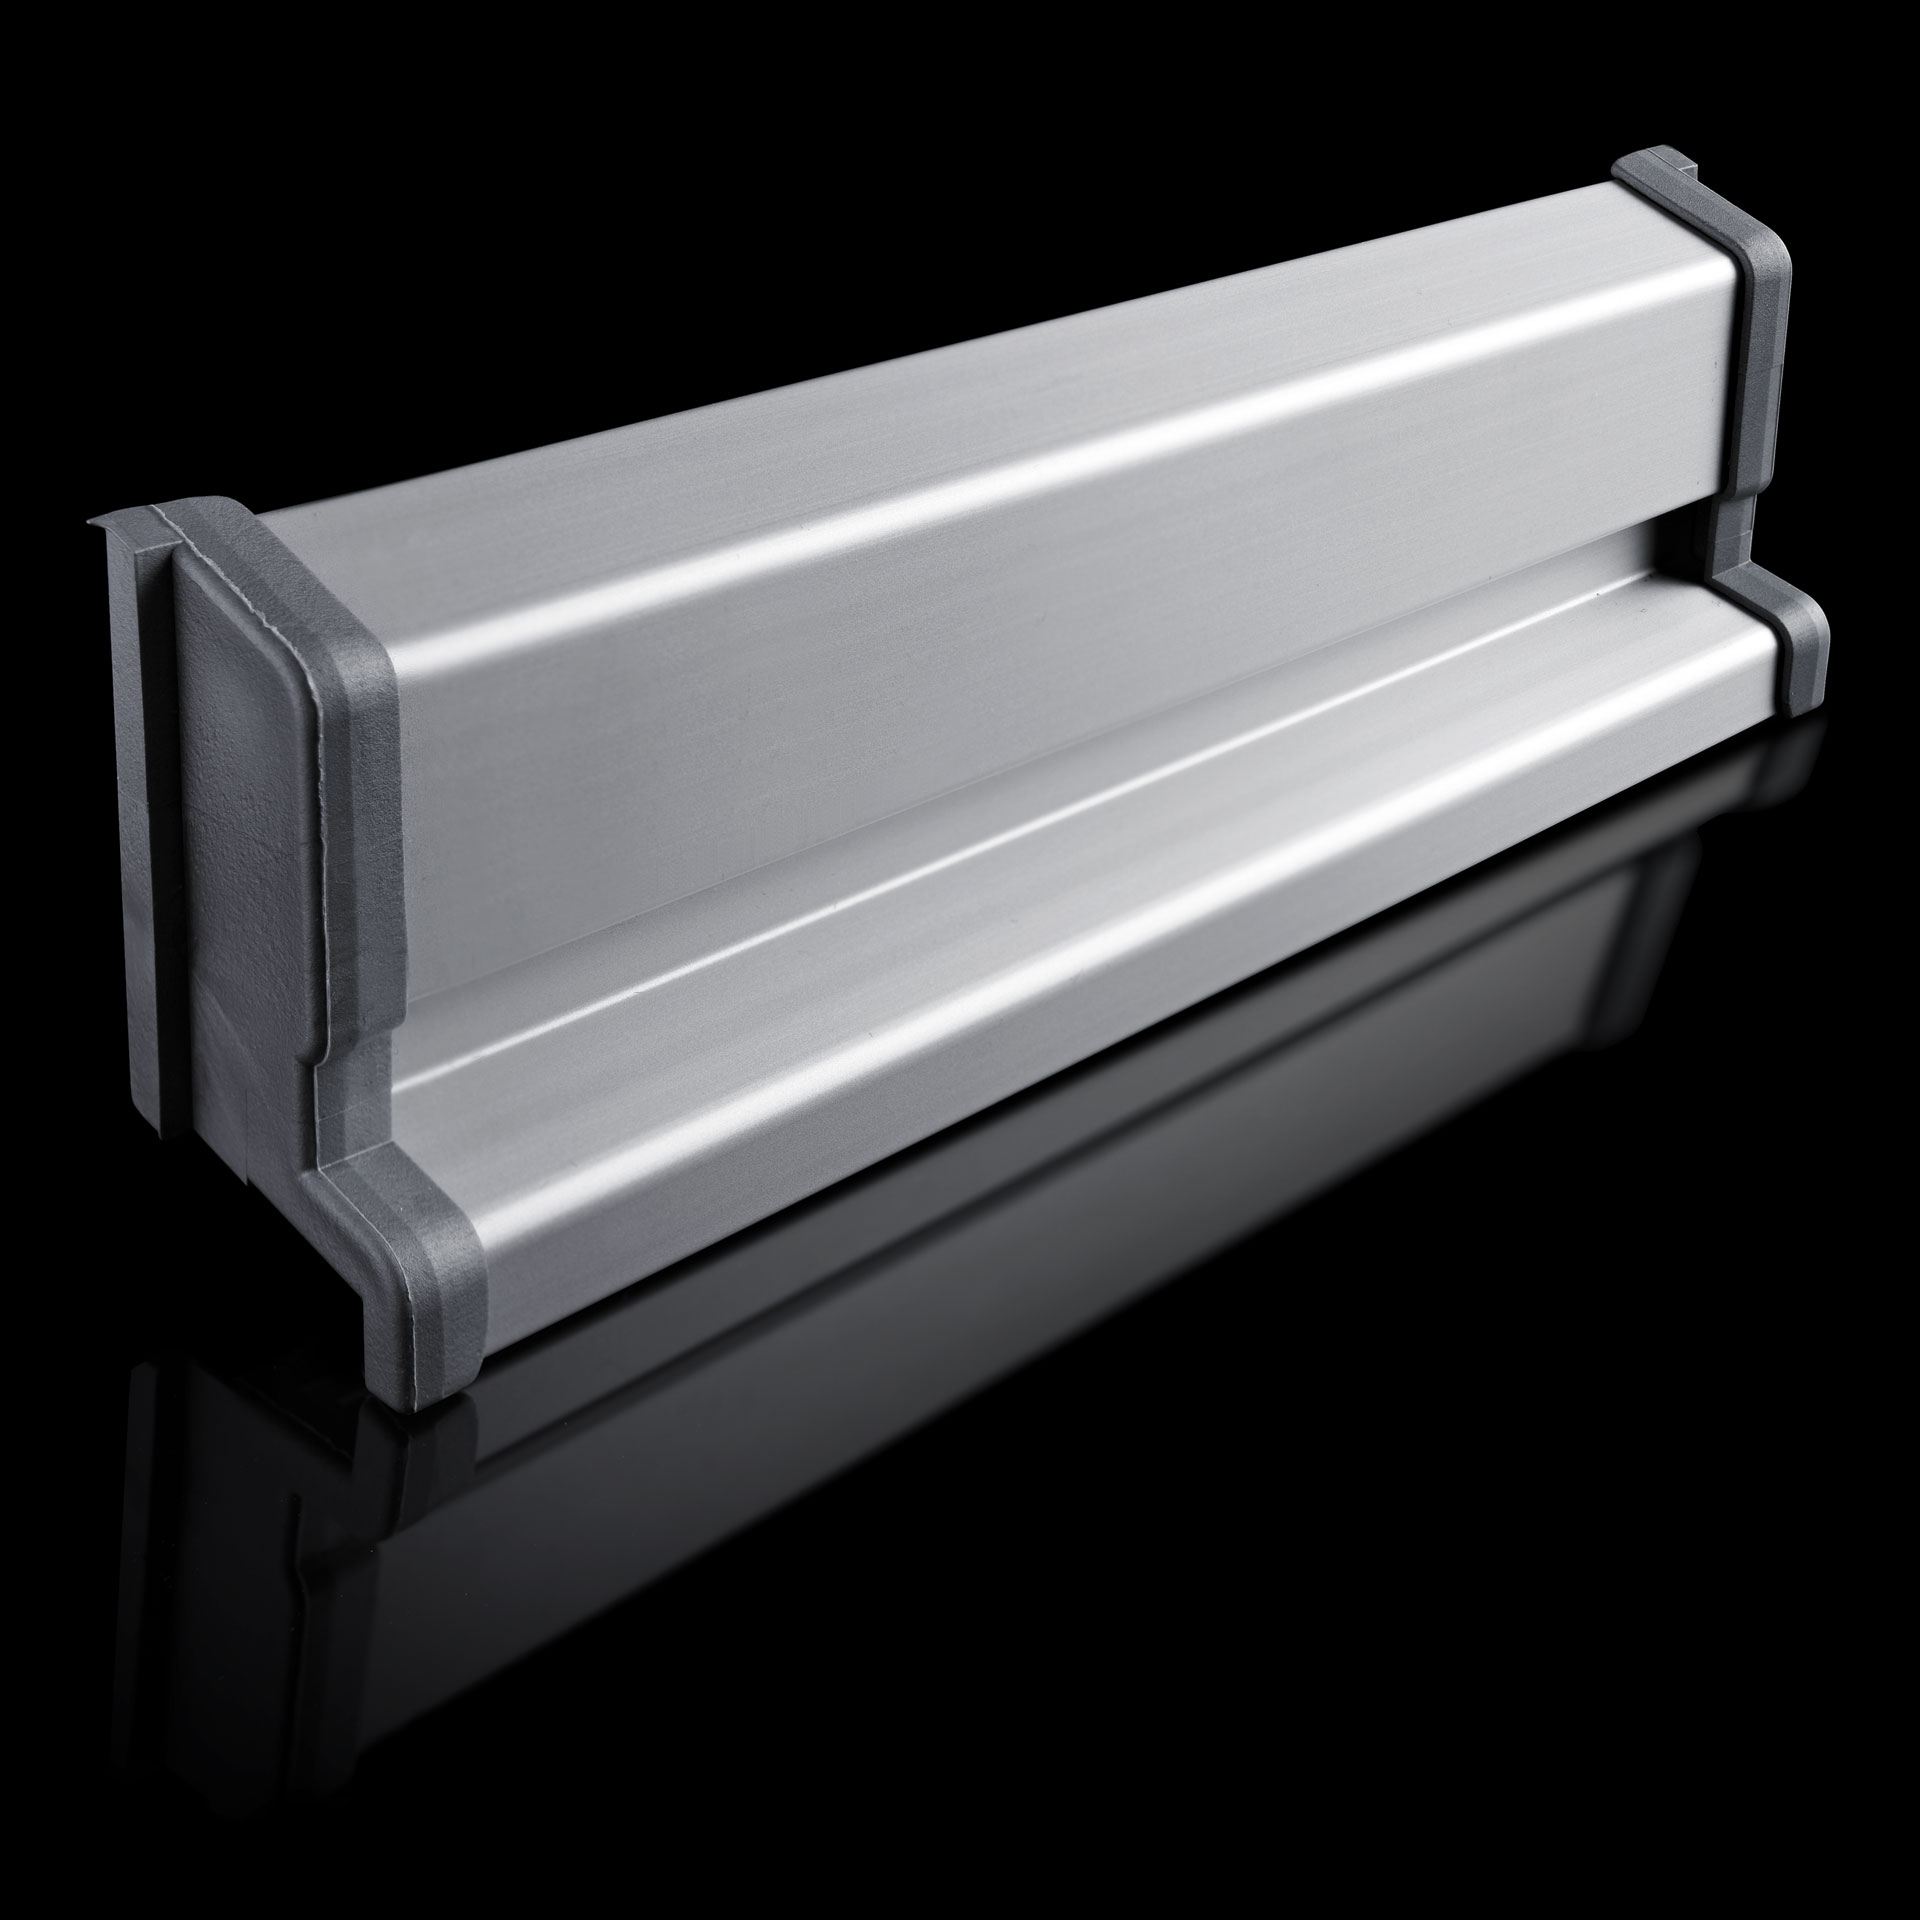 [Translate to EN_GB:] GUTMANN Weather Bars Spree / Spree-D and Sash Covering Profiles offer greatest possible protection from rain via a controlled surface water drainage. Optimal rear ventilation.